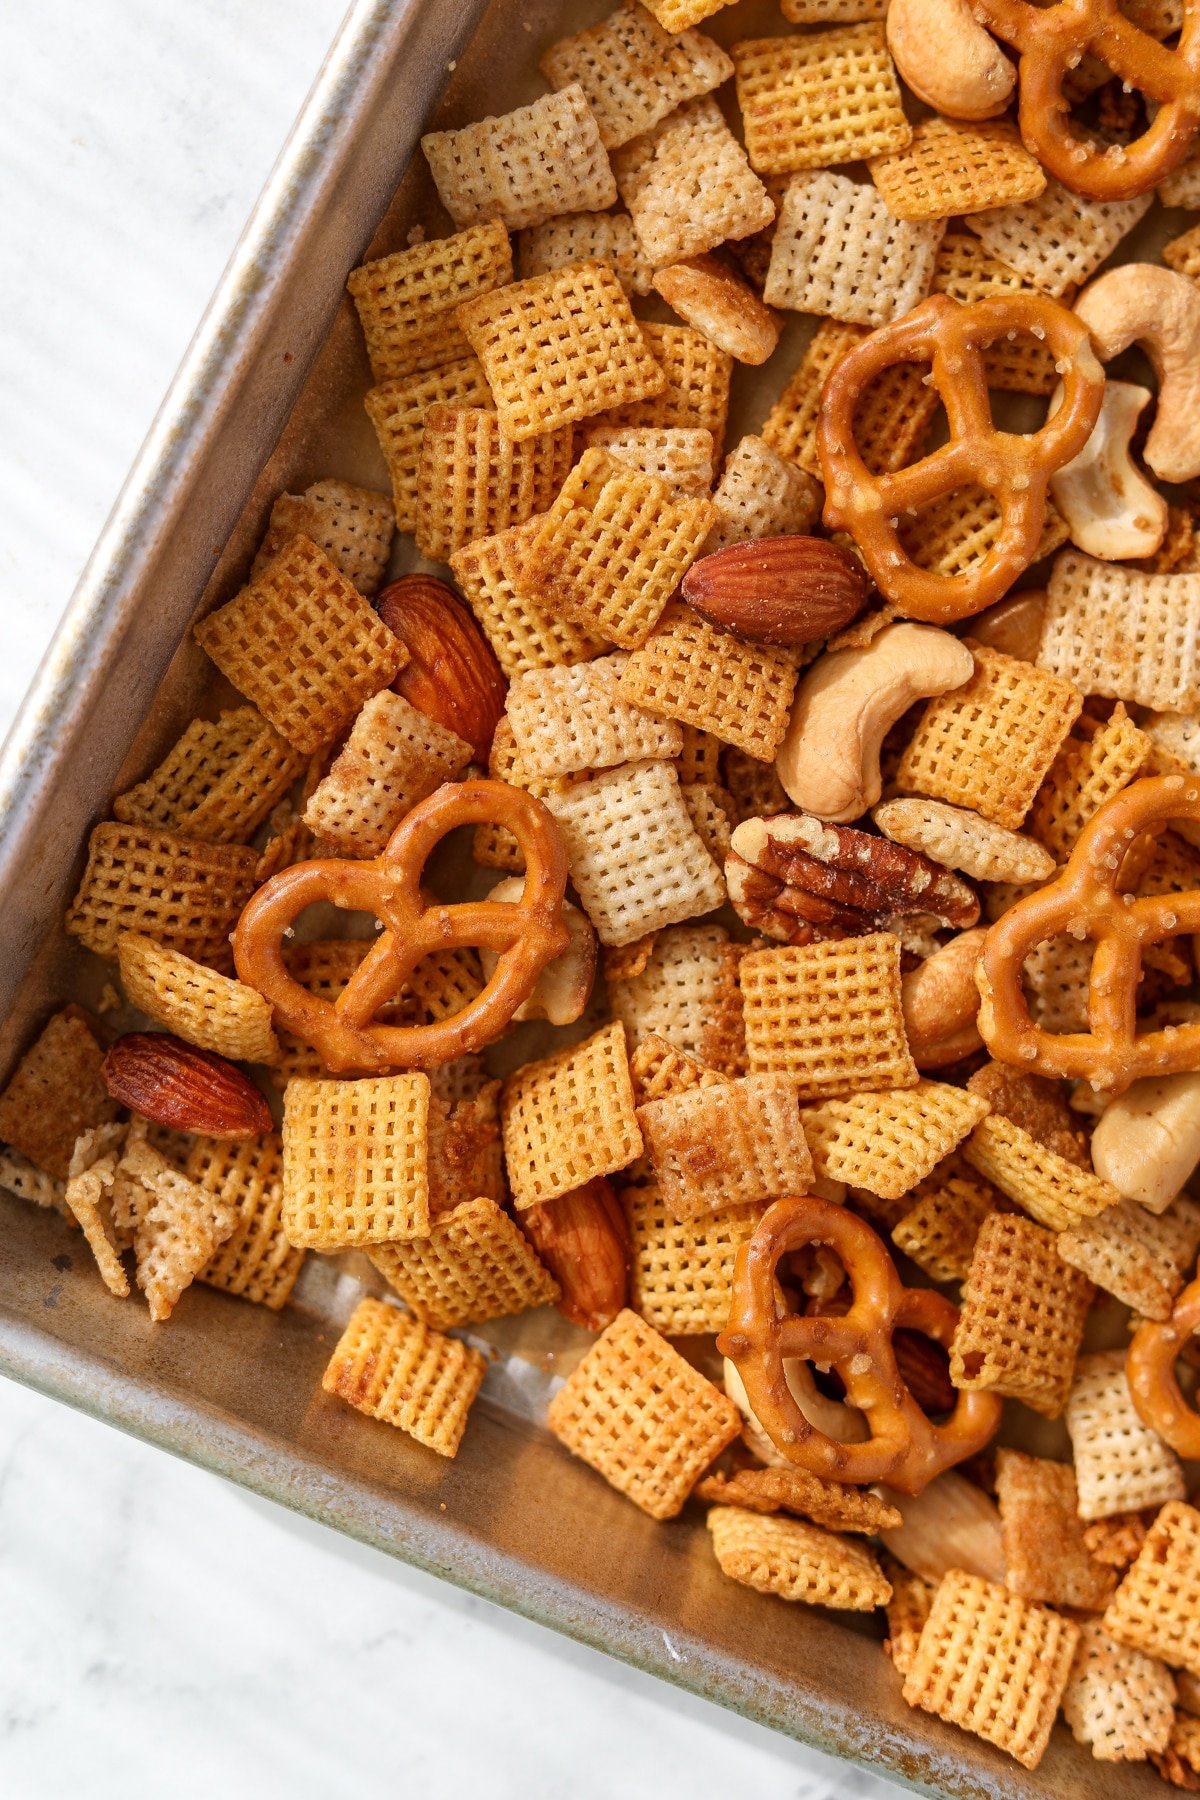 A baking sheet with chex mix featuring pretzels and mixed nuts.